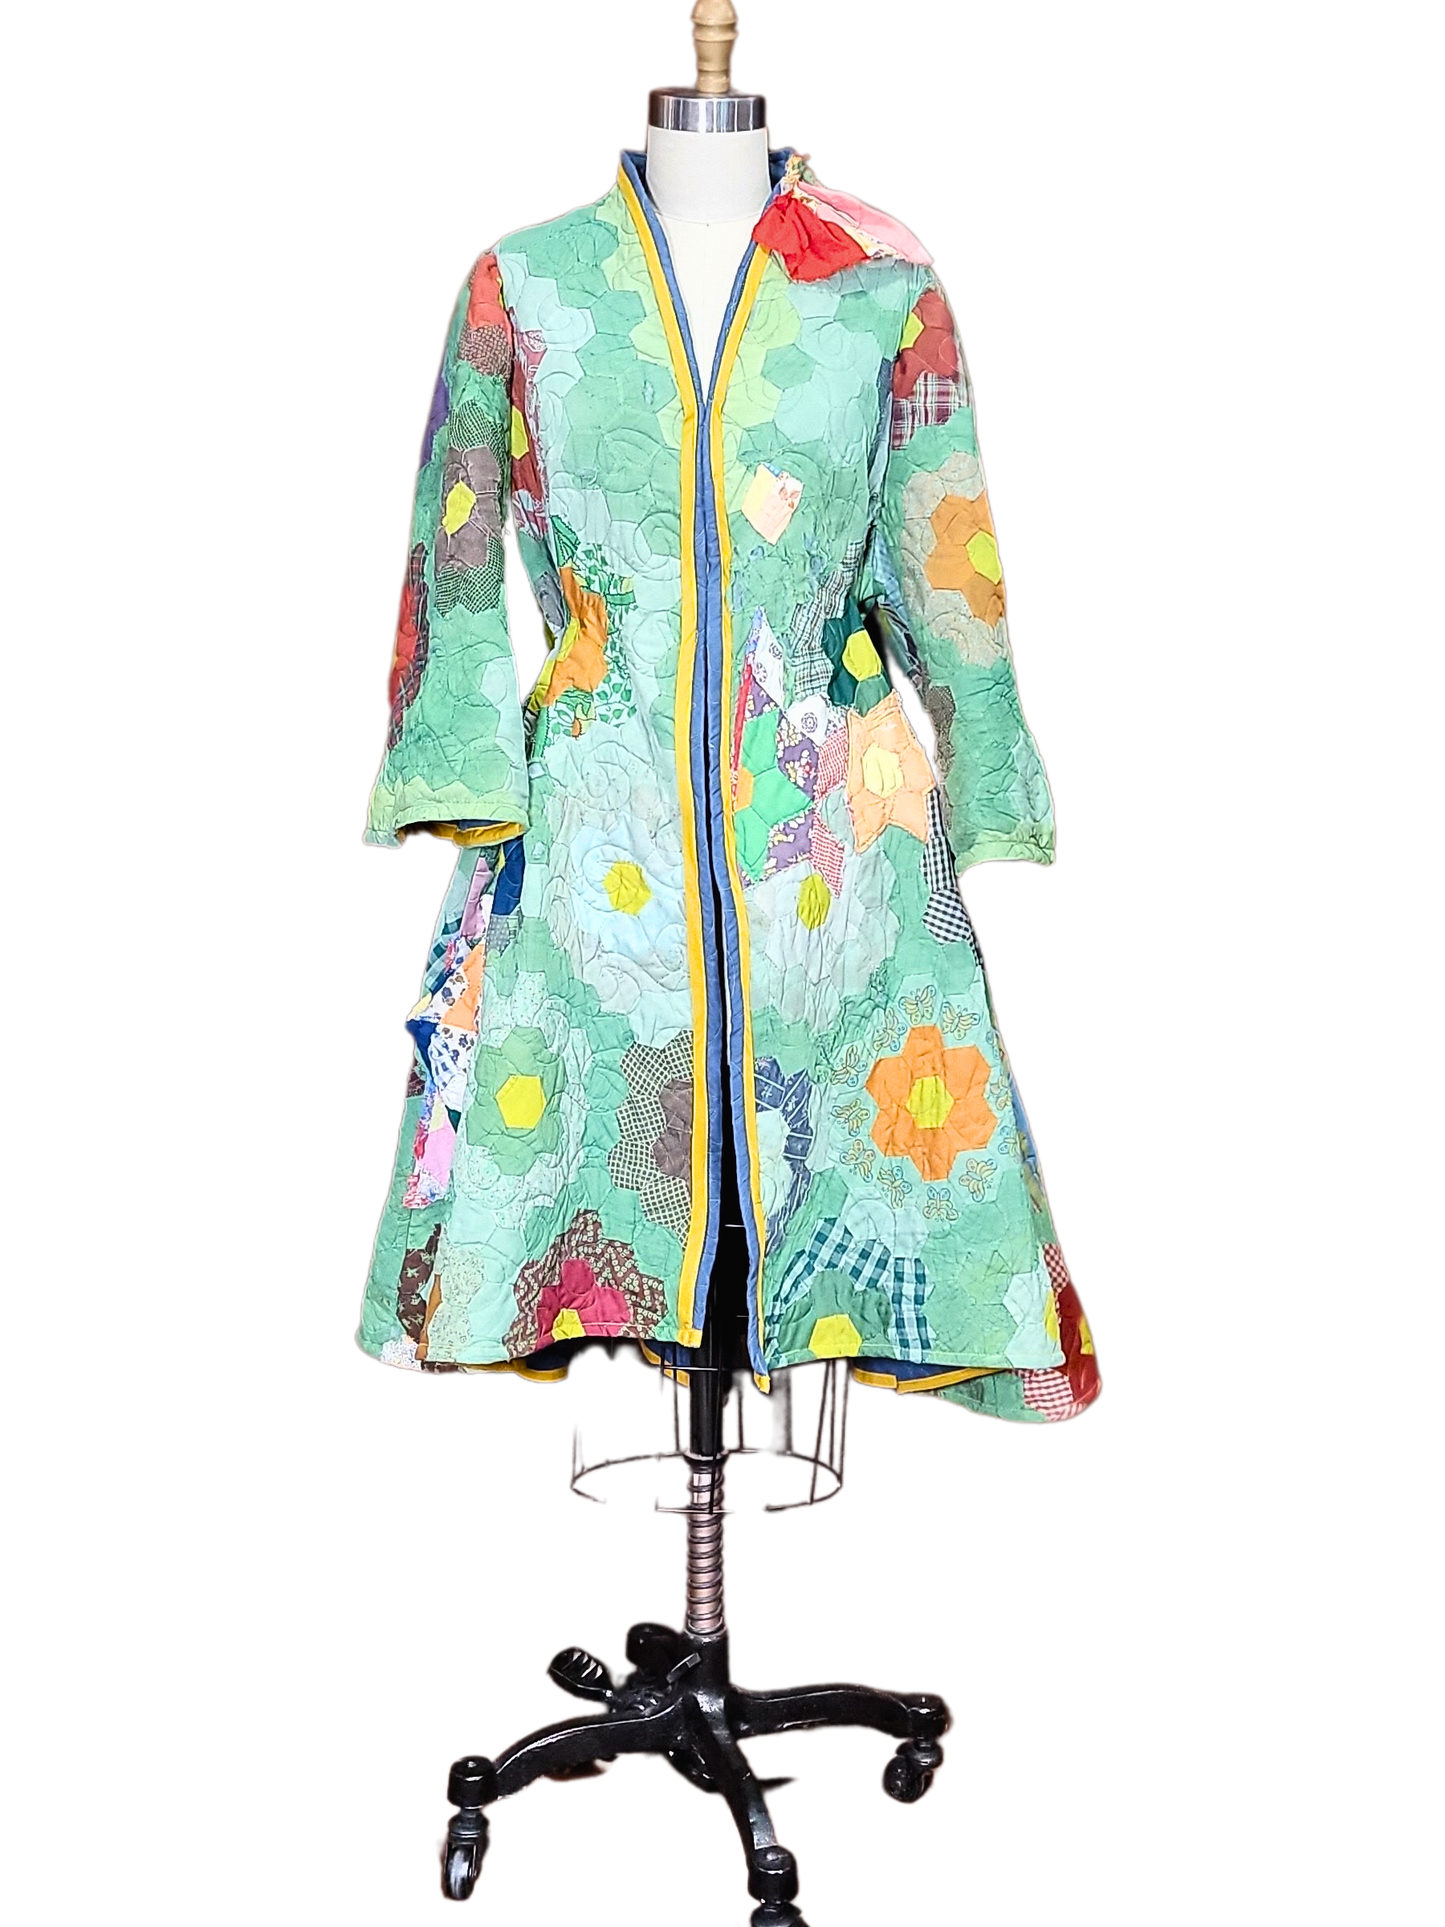 Vintage Quilt Jacket - All Season Split Back with Hi-Low Hemline - Hex Granny Floral Garden - Hand Dyed Green with Over-Patching and Stitchwork